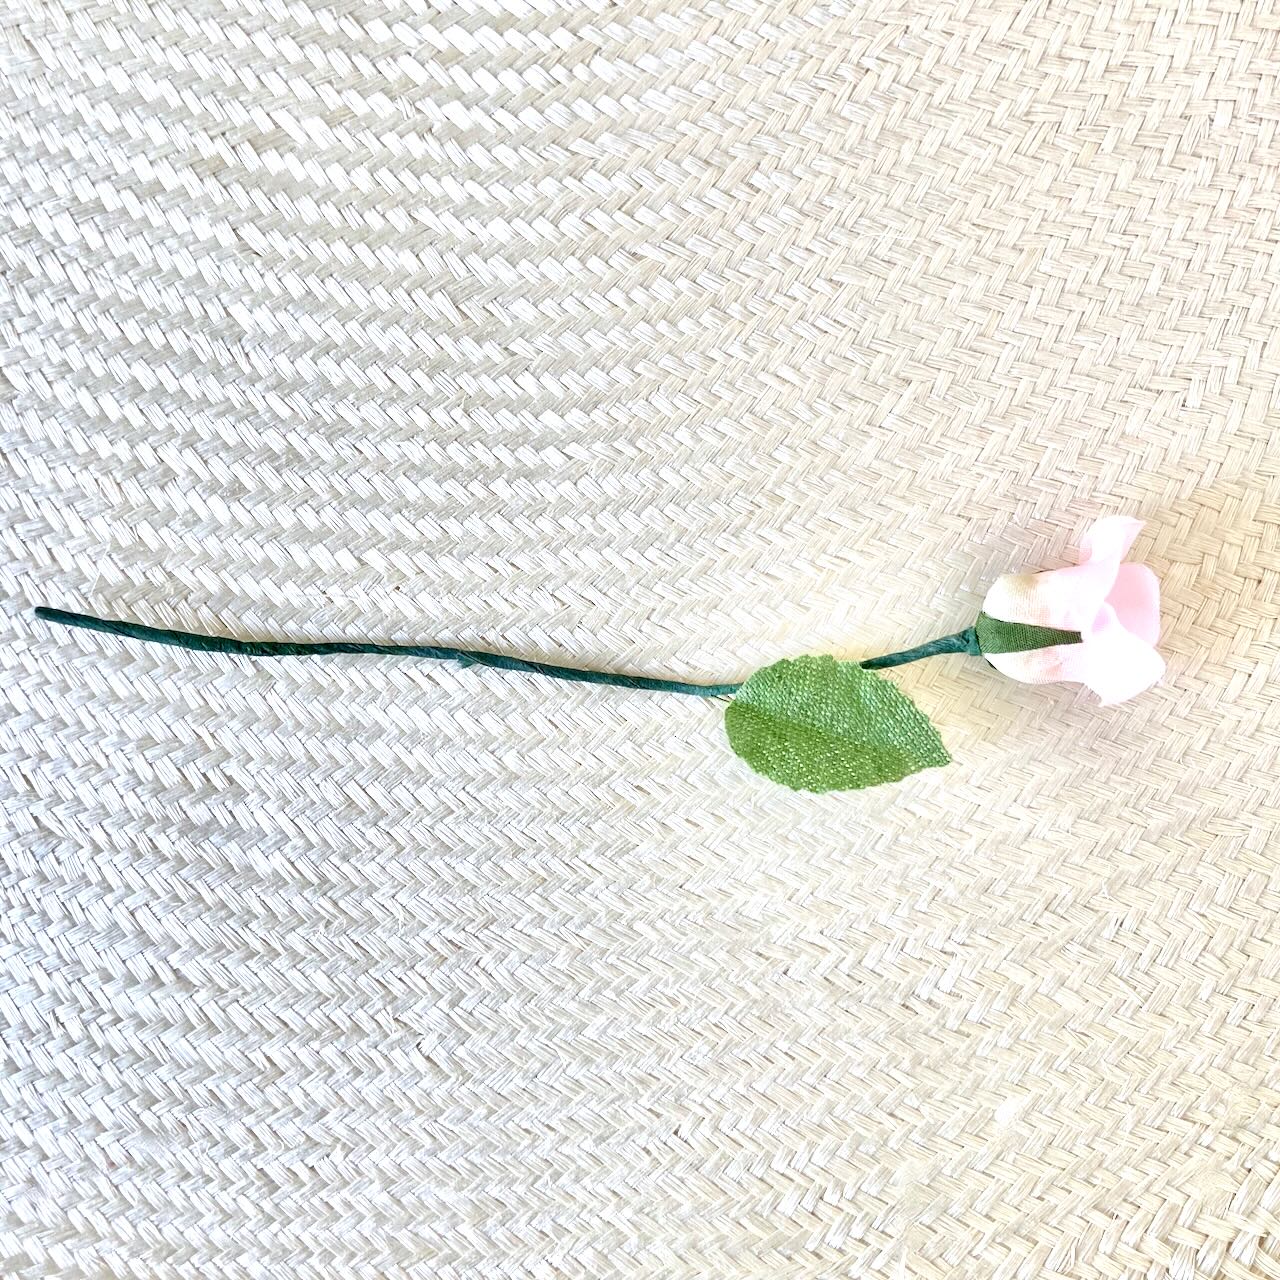     Small_Pink_Rose_Bud